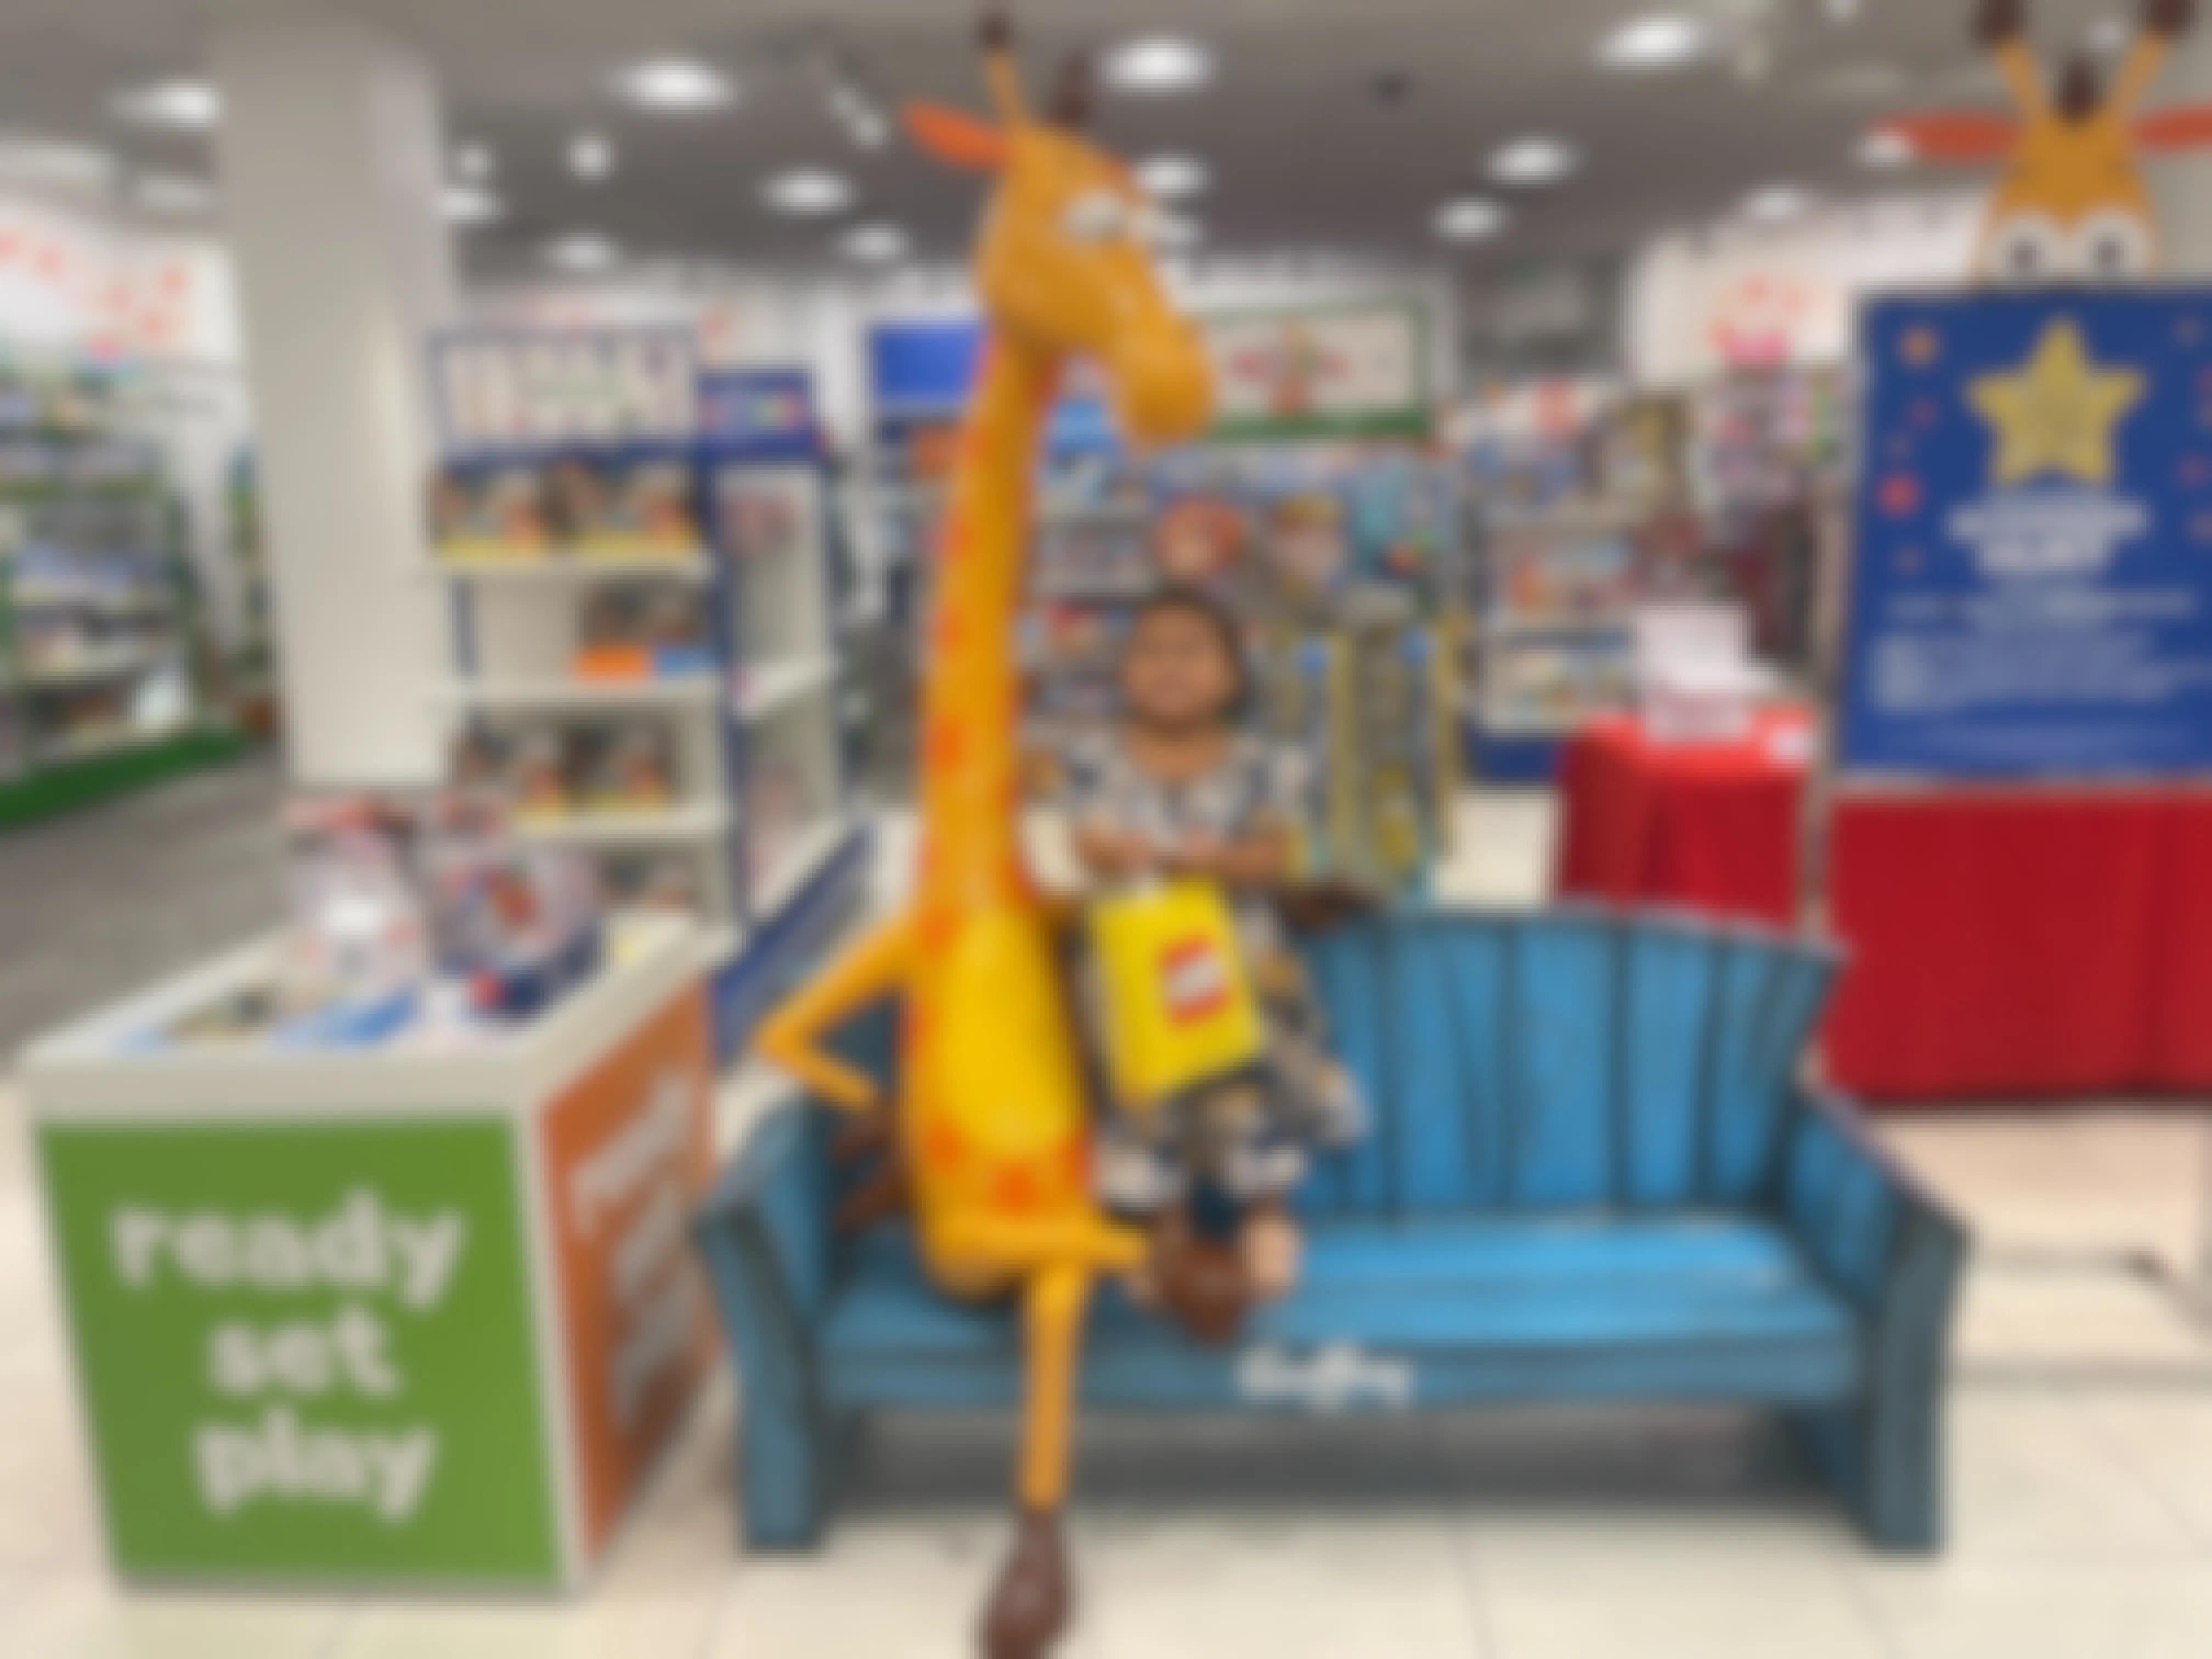 A small child sitting on a bench next to Toys R Us Geoffrey the giraffe in a store.